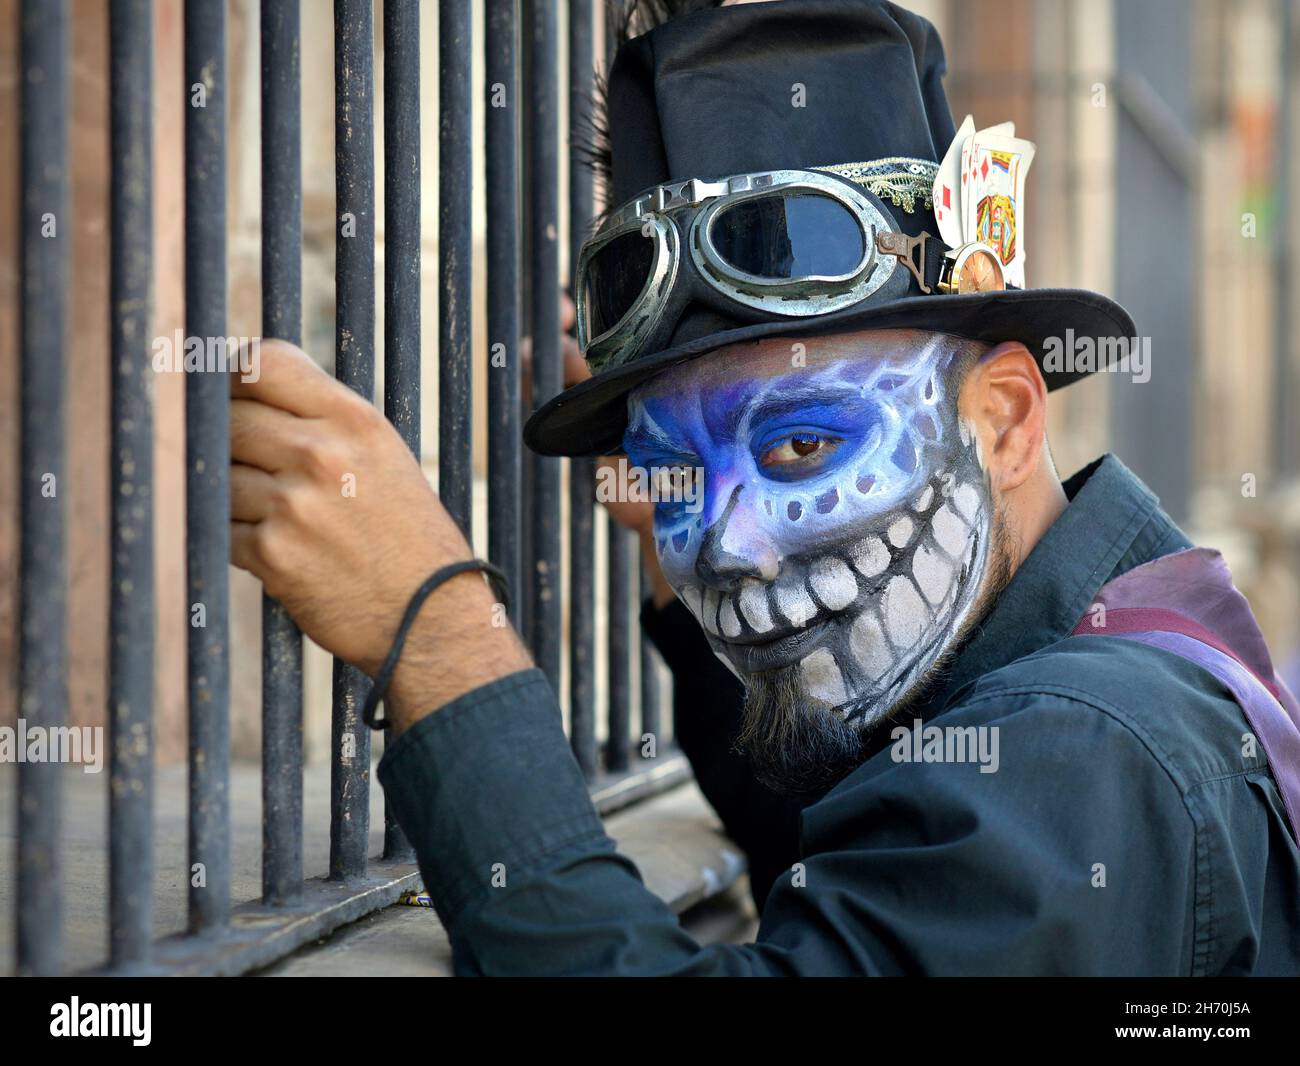 Costumed young Mexican Yucatecan man with spooky blue face painting holds onto strong burglar bars on the Day of the Dead (Día de los Muertos). Stock Photo